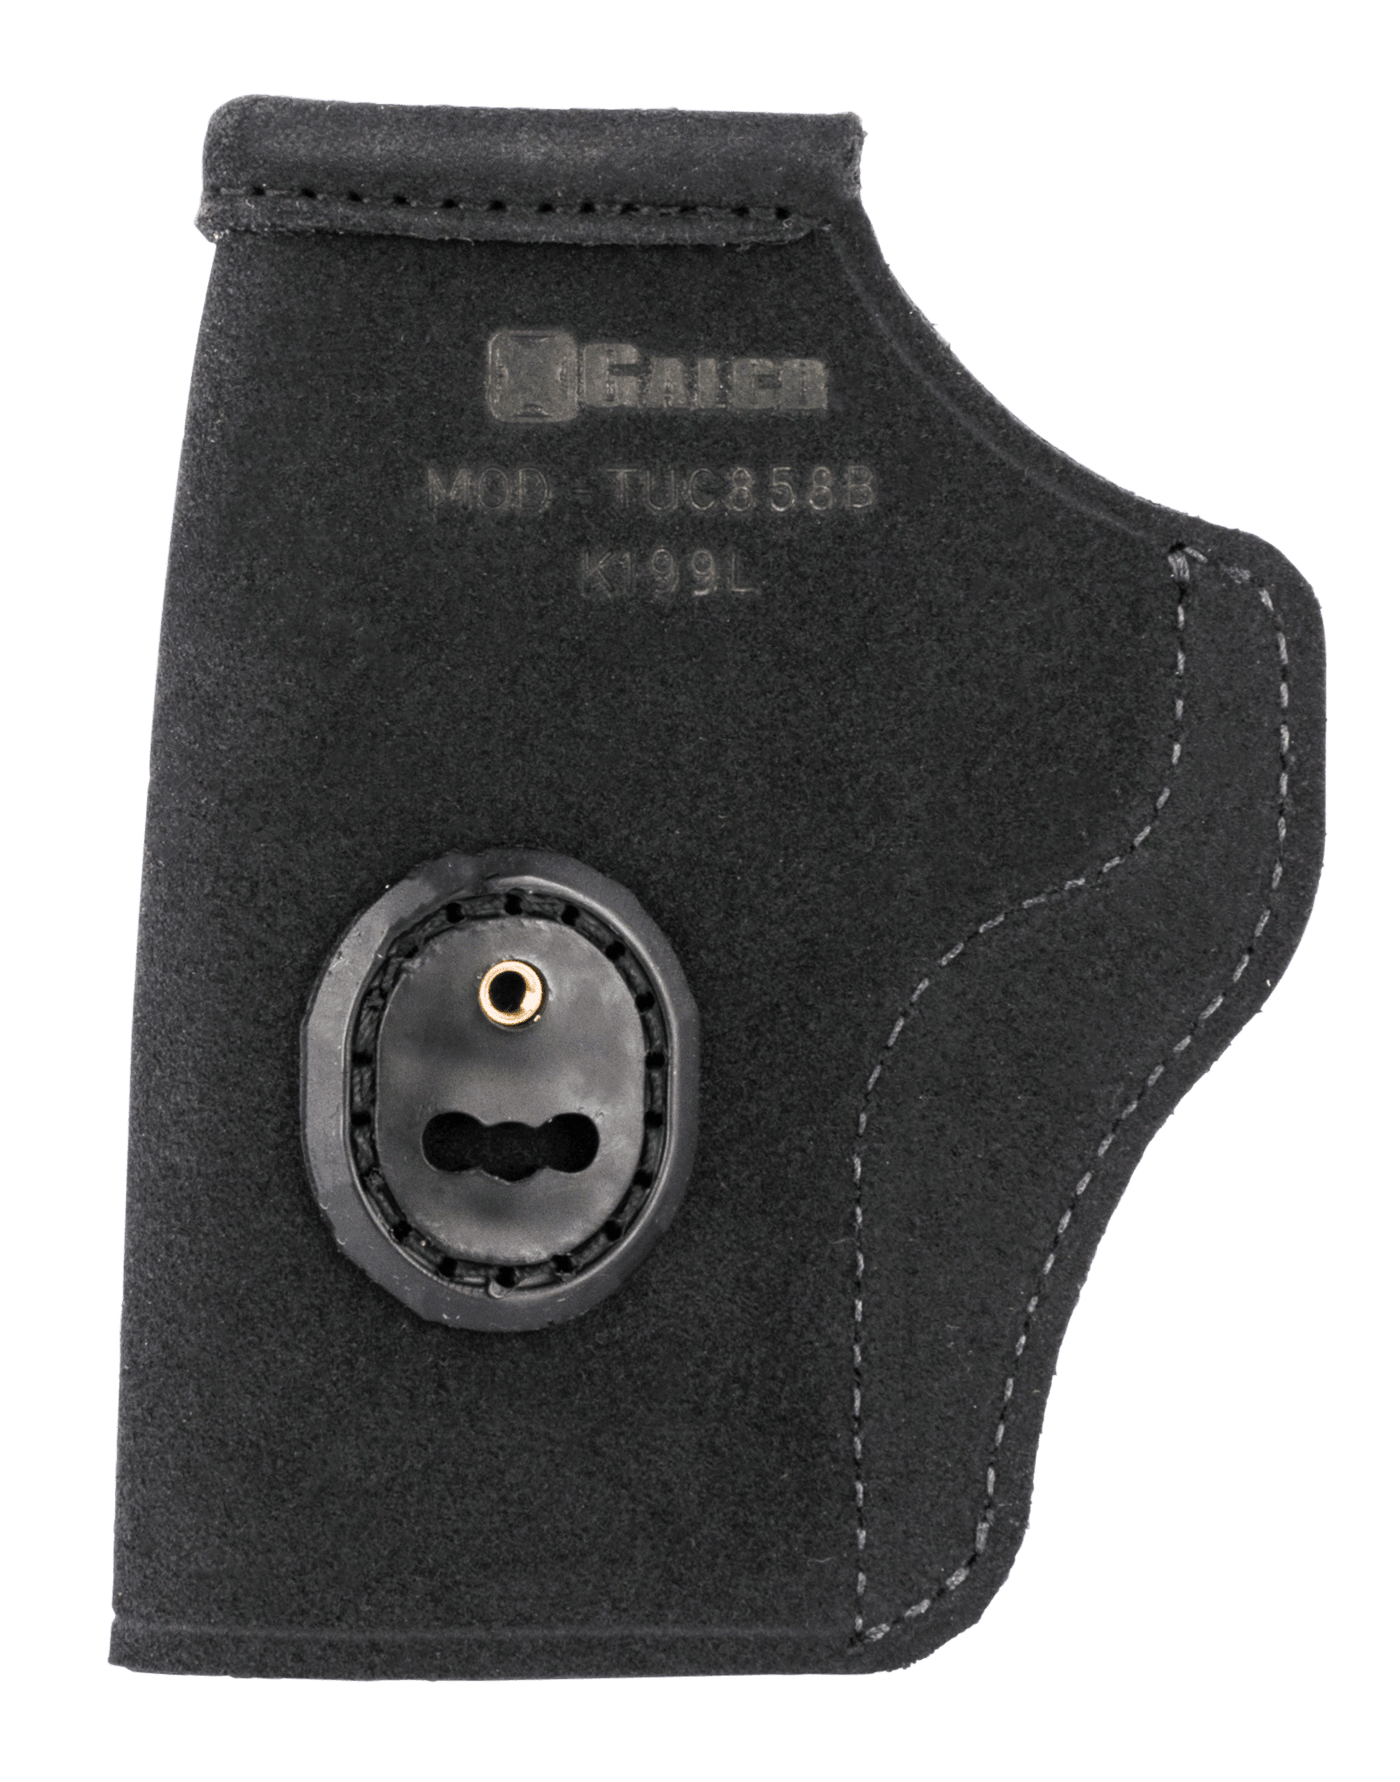 Galco Galco Tuck-n-go Itp Holster - Ambi Lther S&w Shld 380 Ez Blk Holsters And Related Items